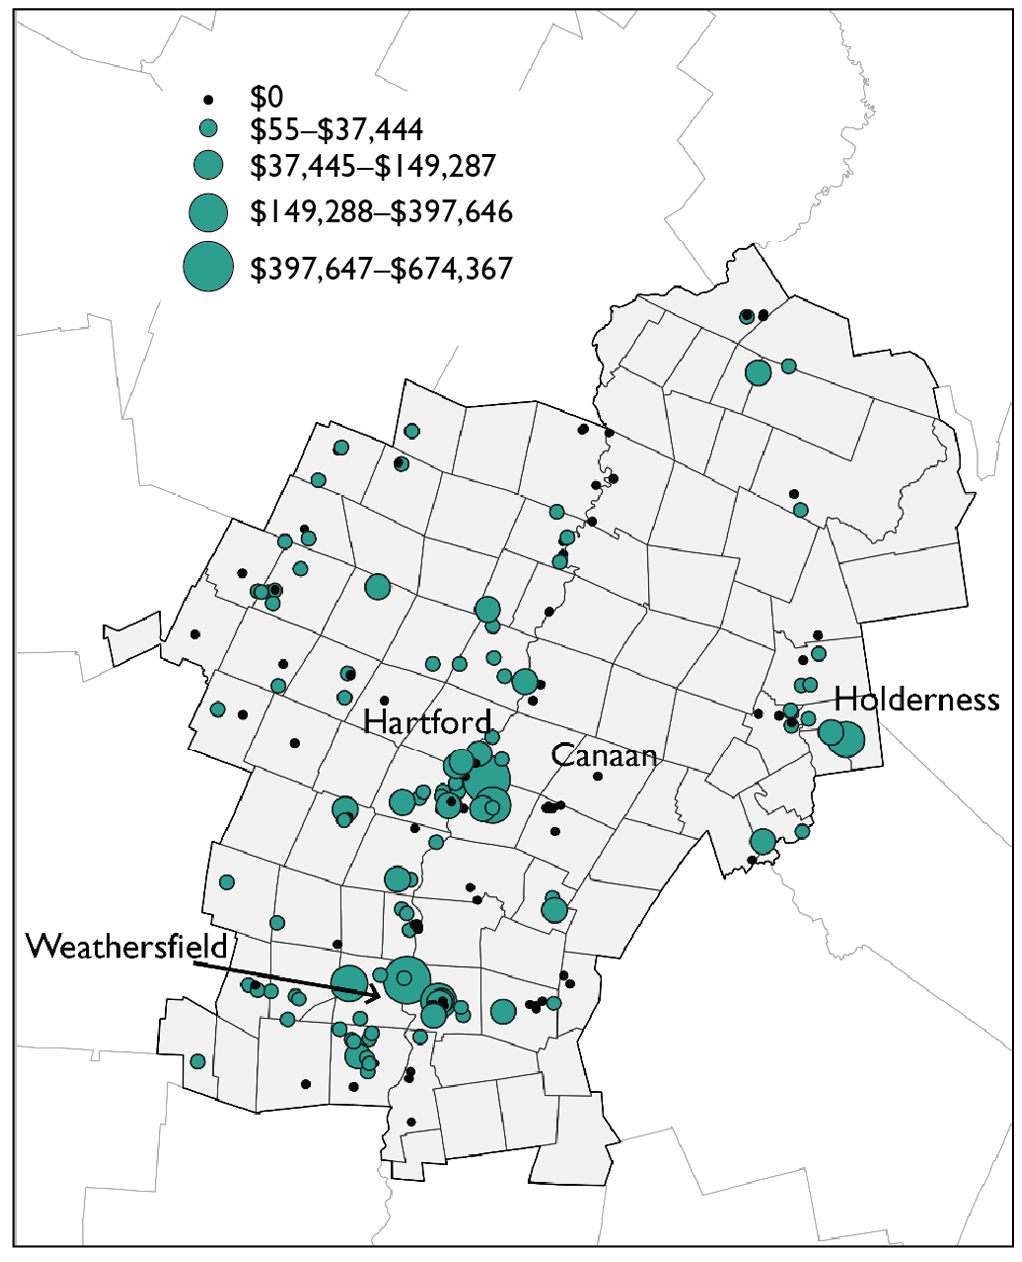 Figure 3. Regional map of child care providers by amount of CARES Act funding received. Awards ranged from $55 to $674,367. Larger awards clustered around Hartford, Lebanon, Claremont, Weathersfield, and Holderness. 